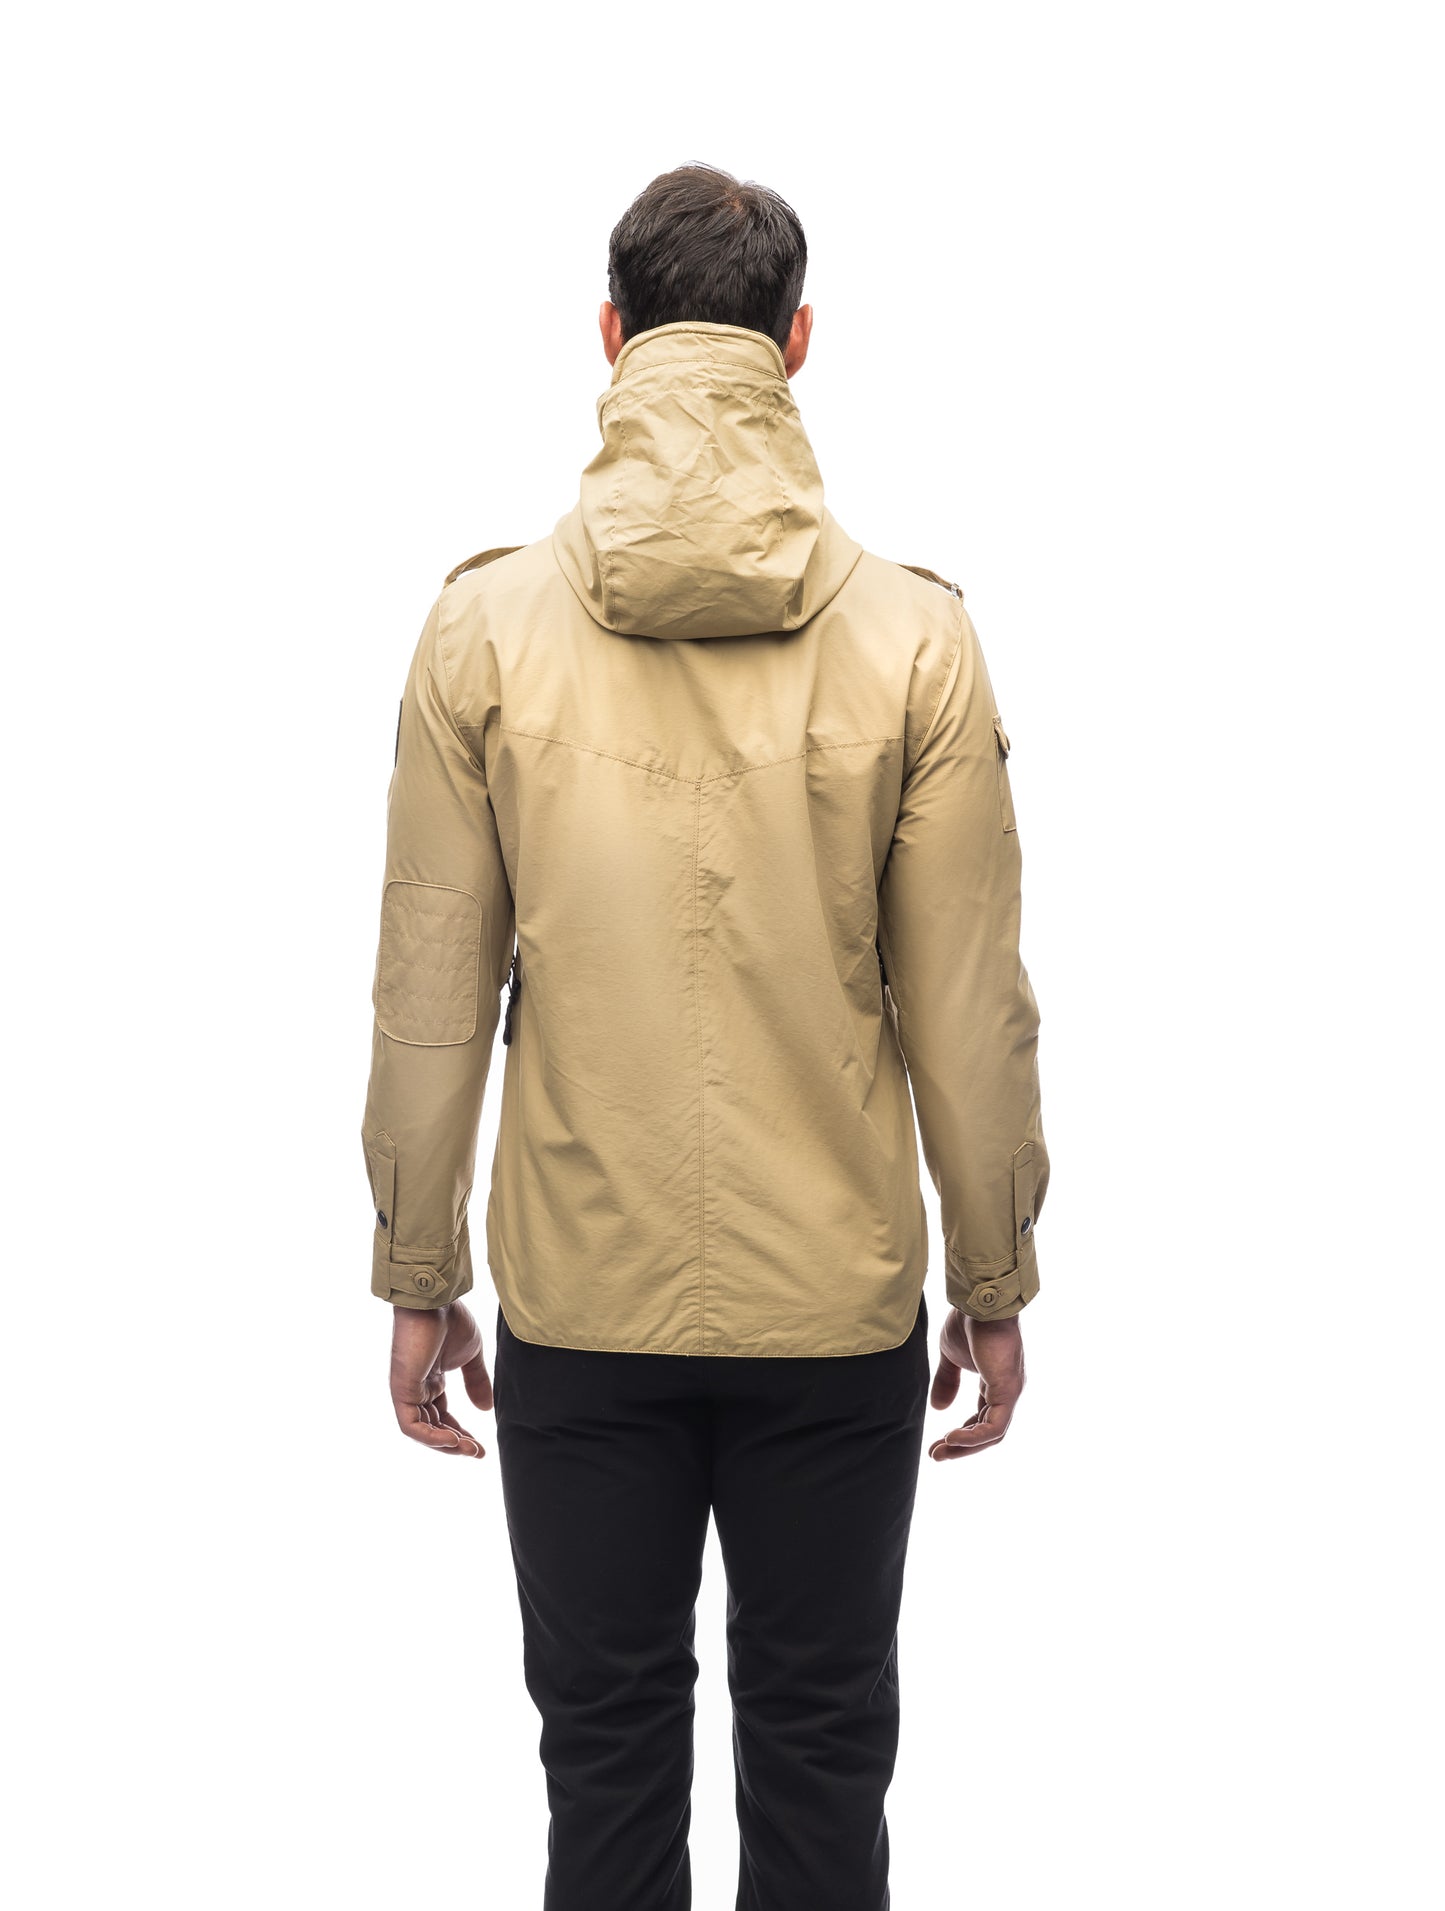 Men's hooded shirt jacket with patch chest pockets in Tan